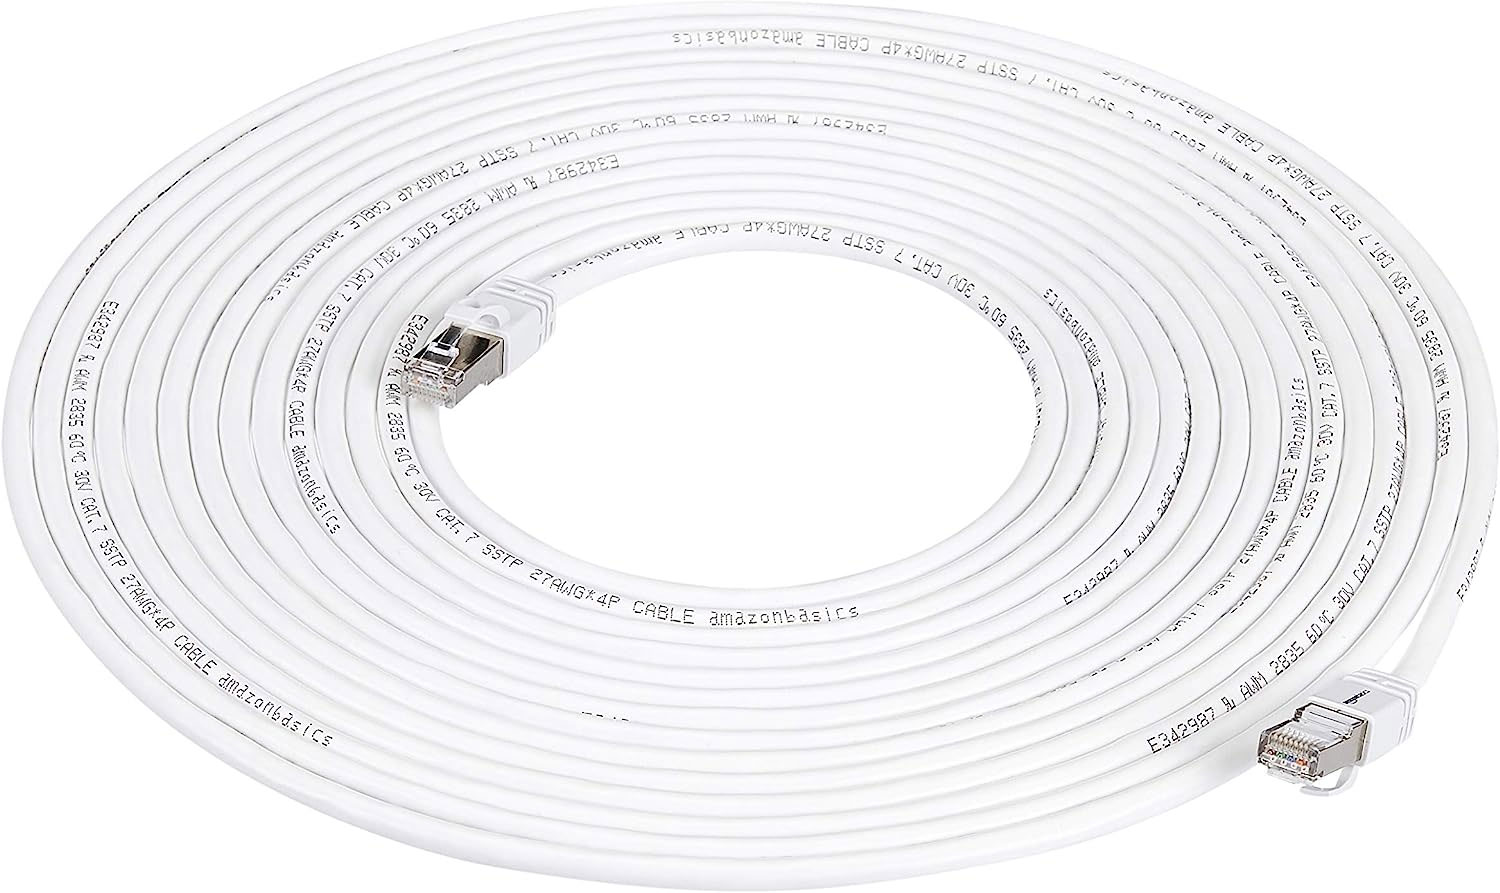 Amazon Basics Cat7 Cable - Best for speed on a budget